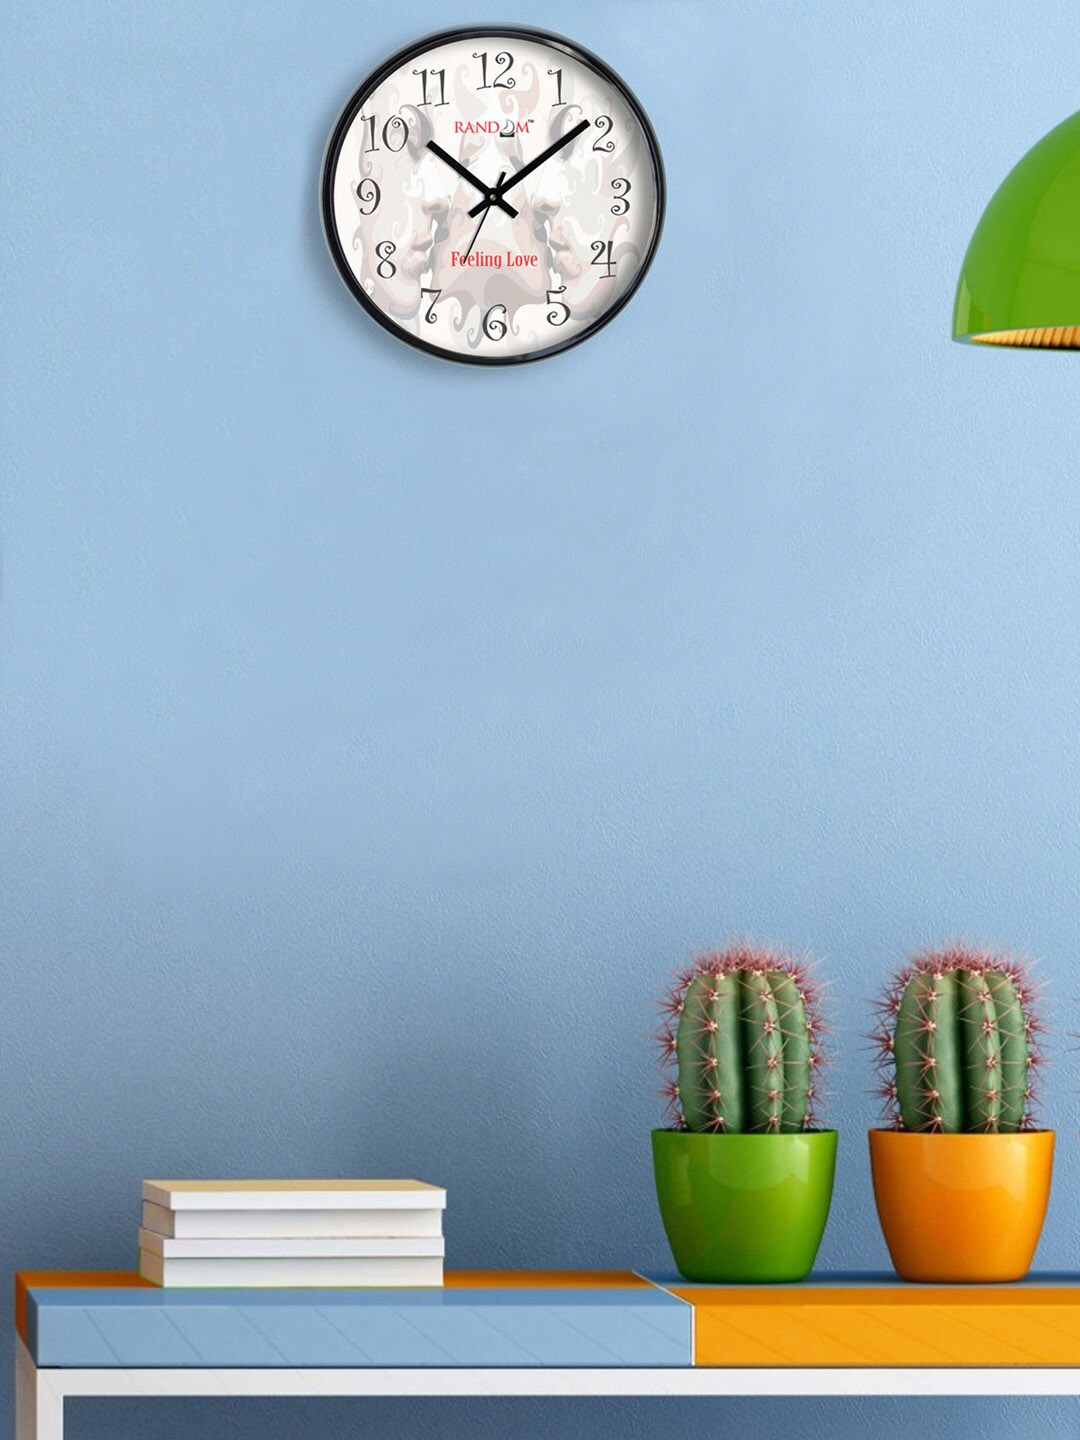 RANDOM Off-White Printed Analogue 30.5 cm Wall Clock Price in India